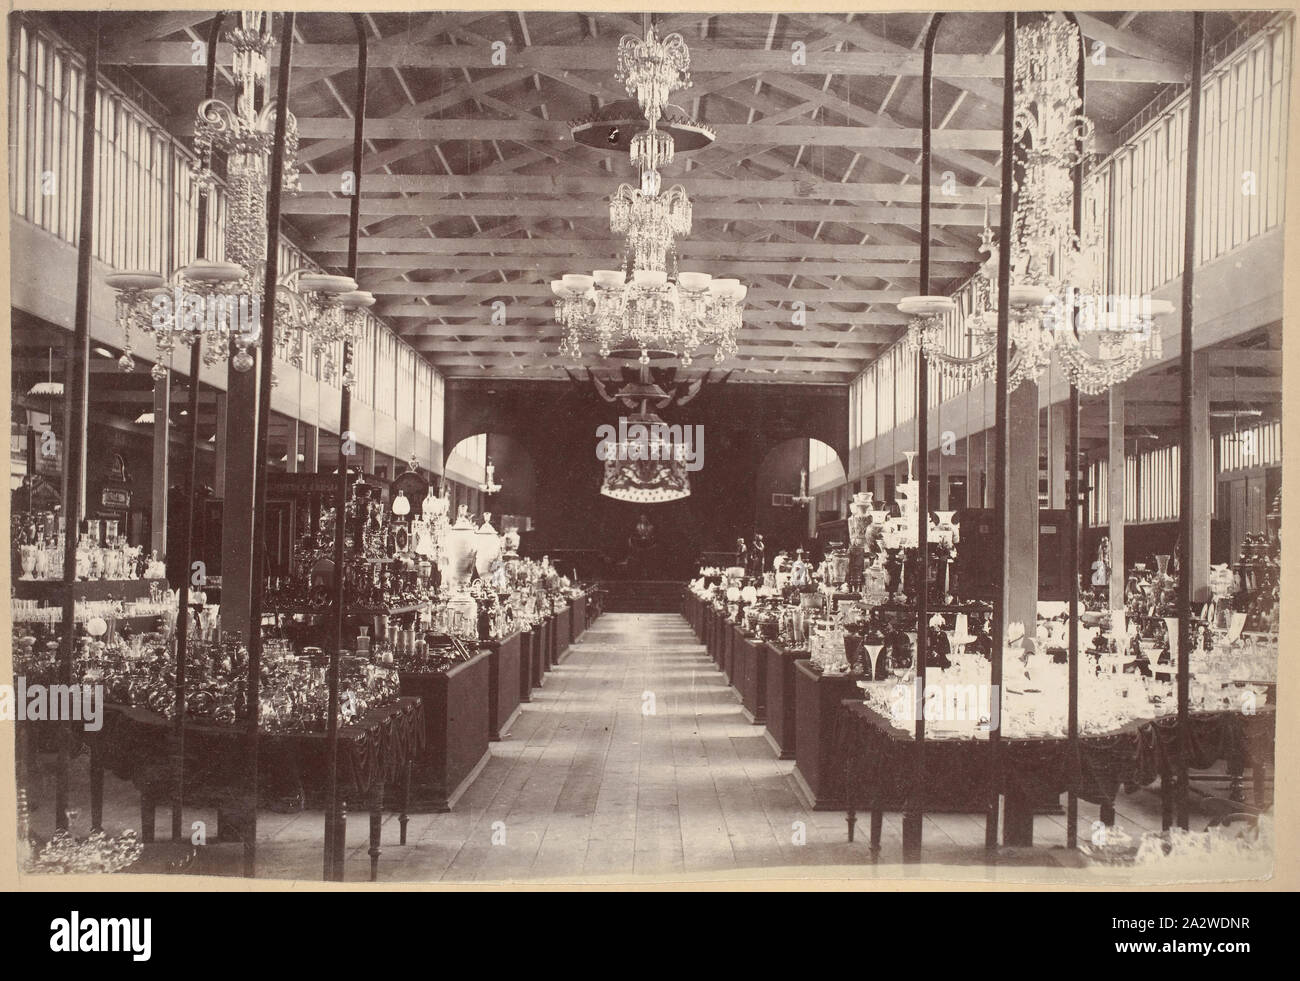 Photograph - Austrian Court, Main Avenue, Exhibition Building, 1880-1881, View looking westwards through the Austrian Court in the central temporary annexe on the western side of the main avenue at the 1880 Melbourne International Exhibition held at the Exhibition Buildings, Carlton Gardens, between 1 October 1880 and 30 April 1881. In addition to the main permanent Exhibition Building, two permanent annexes as well as a large, central wooden temporary annexe Stock Photo